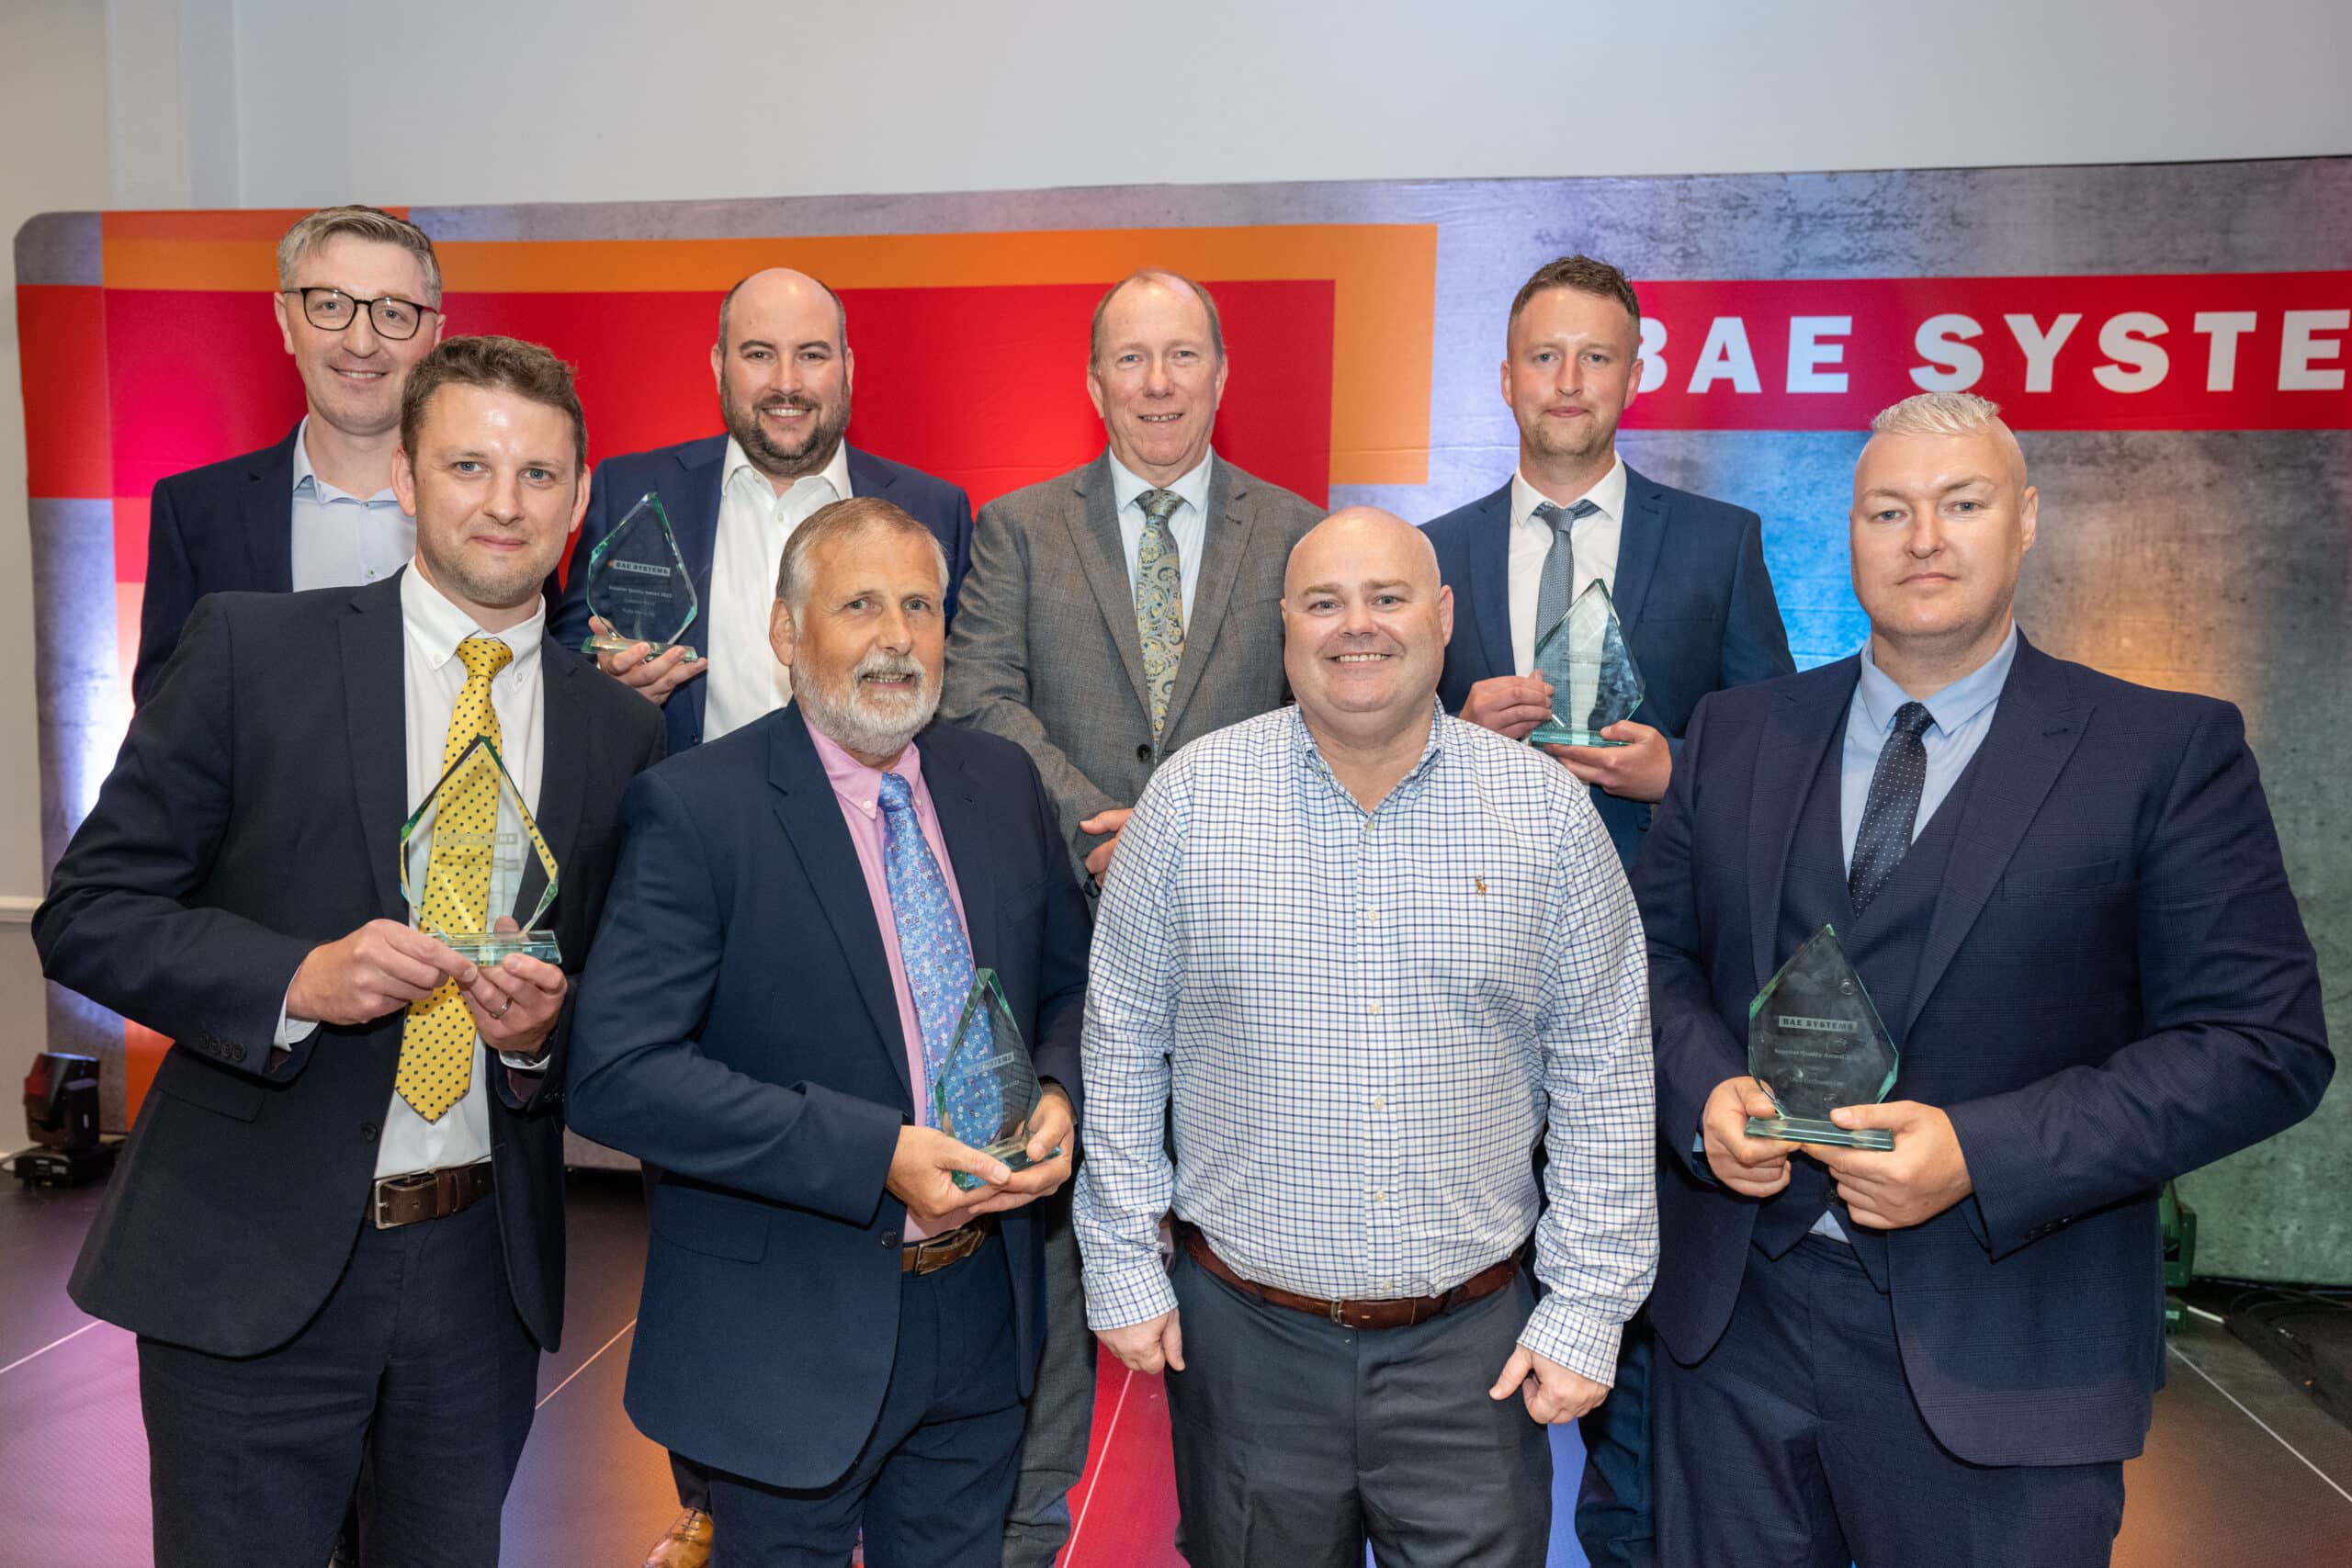 Winner At BAE Systems Quality Awards